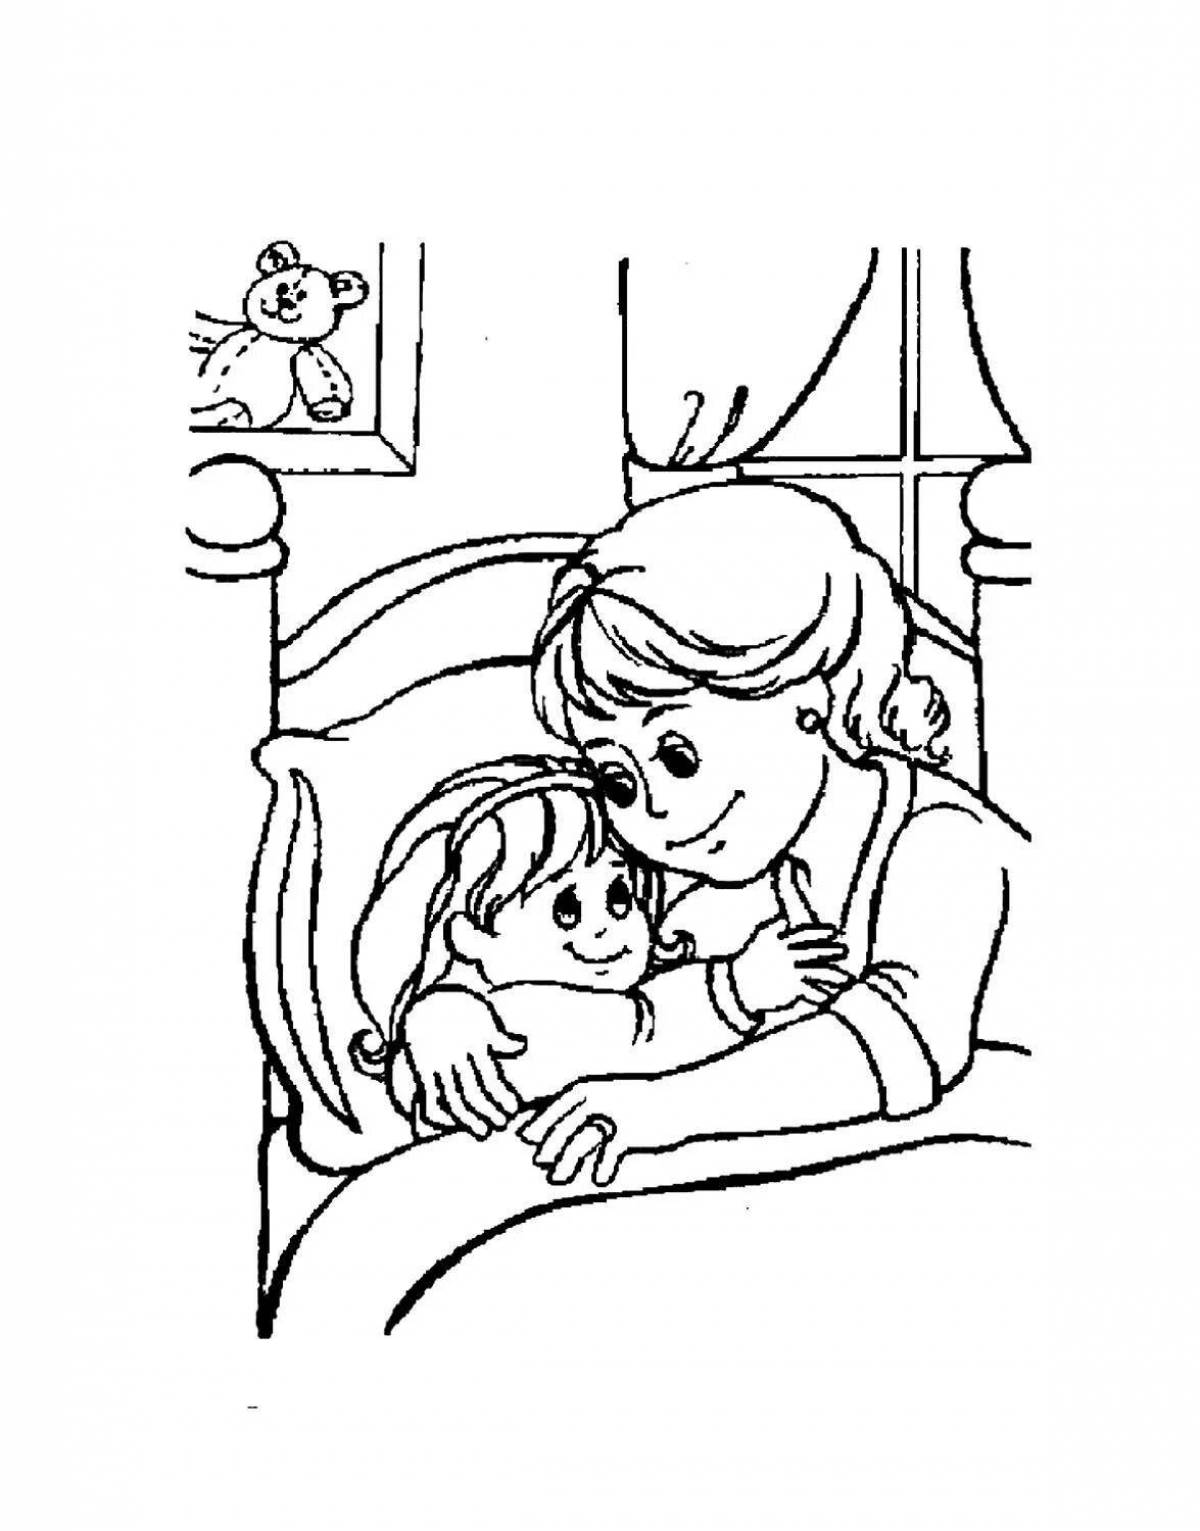 Coloring page violent mother and daughter